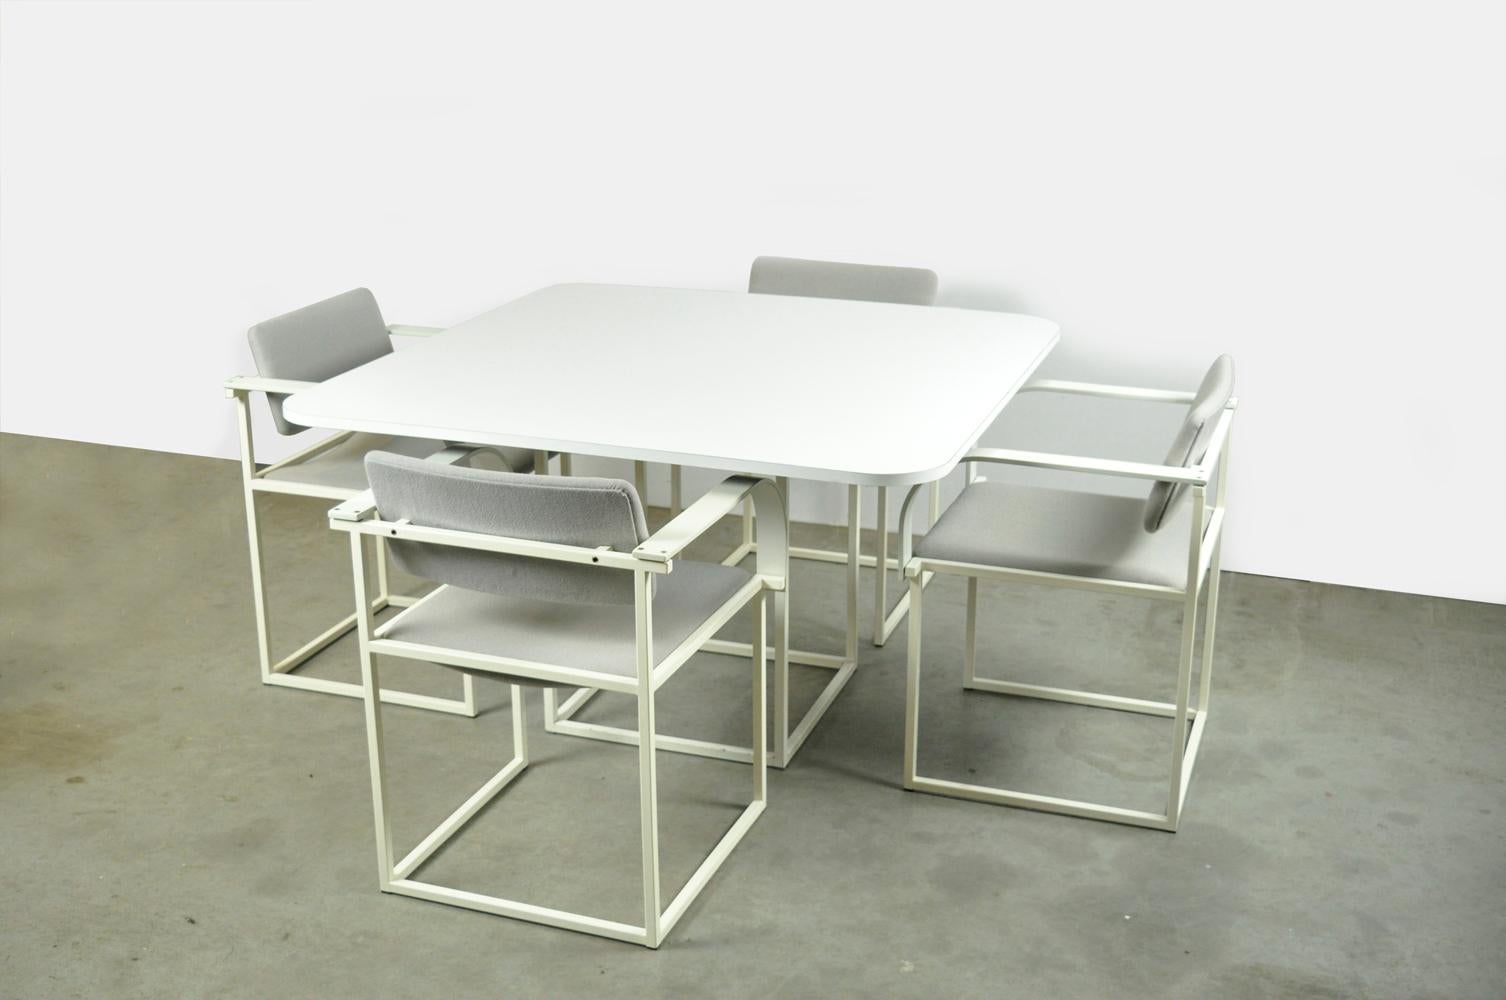 Set of 4 modern vintage dining table chairs type FM80 with matching dining table, type TM40, designed by the duo Pierre Mazairac & Karel Boonzaaijer for Pastoe, 1980s. The chairs have a white spray-painted metal tubular frame with white curved